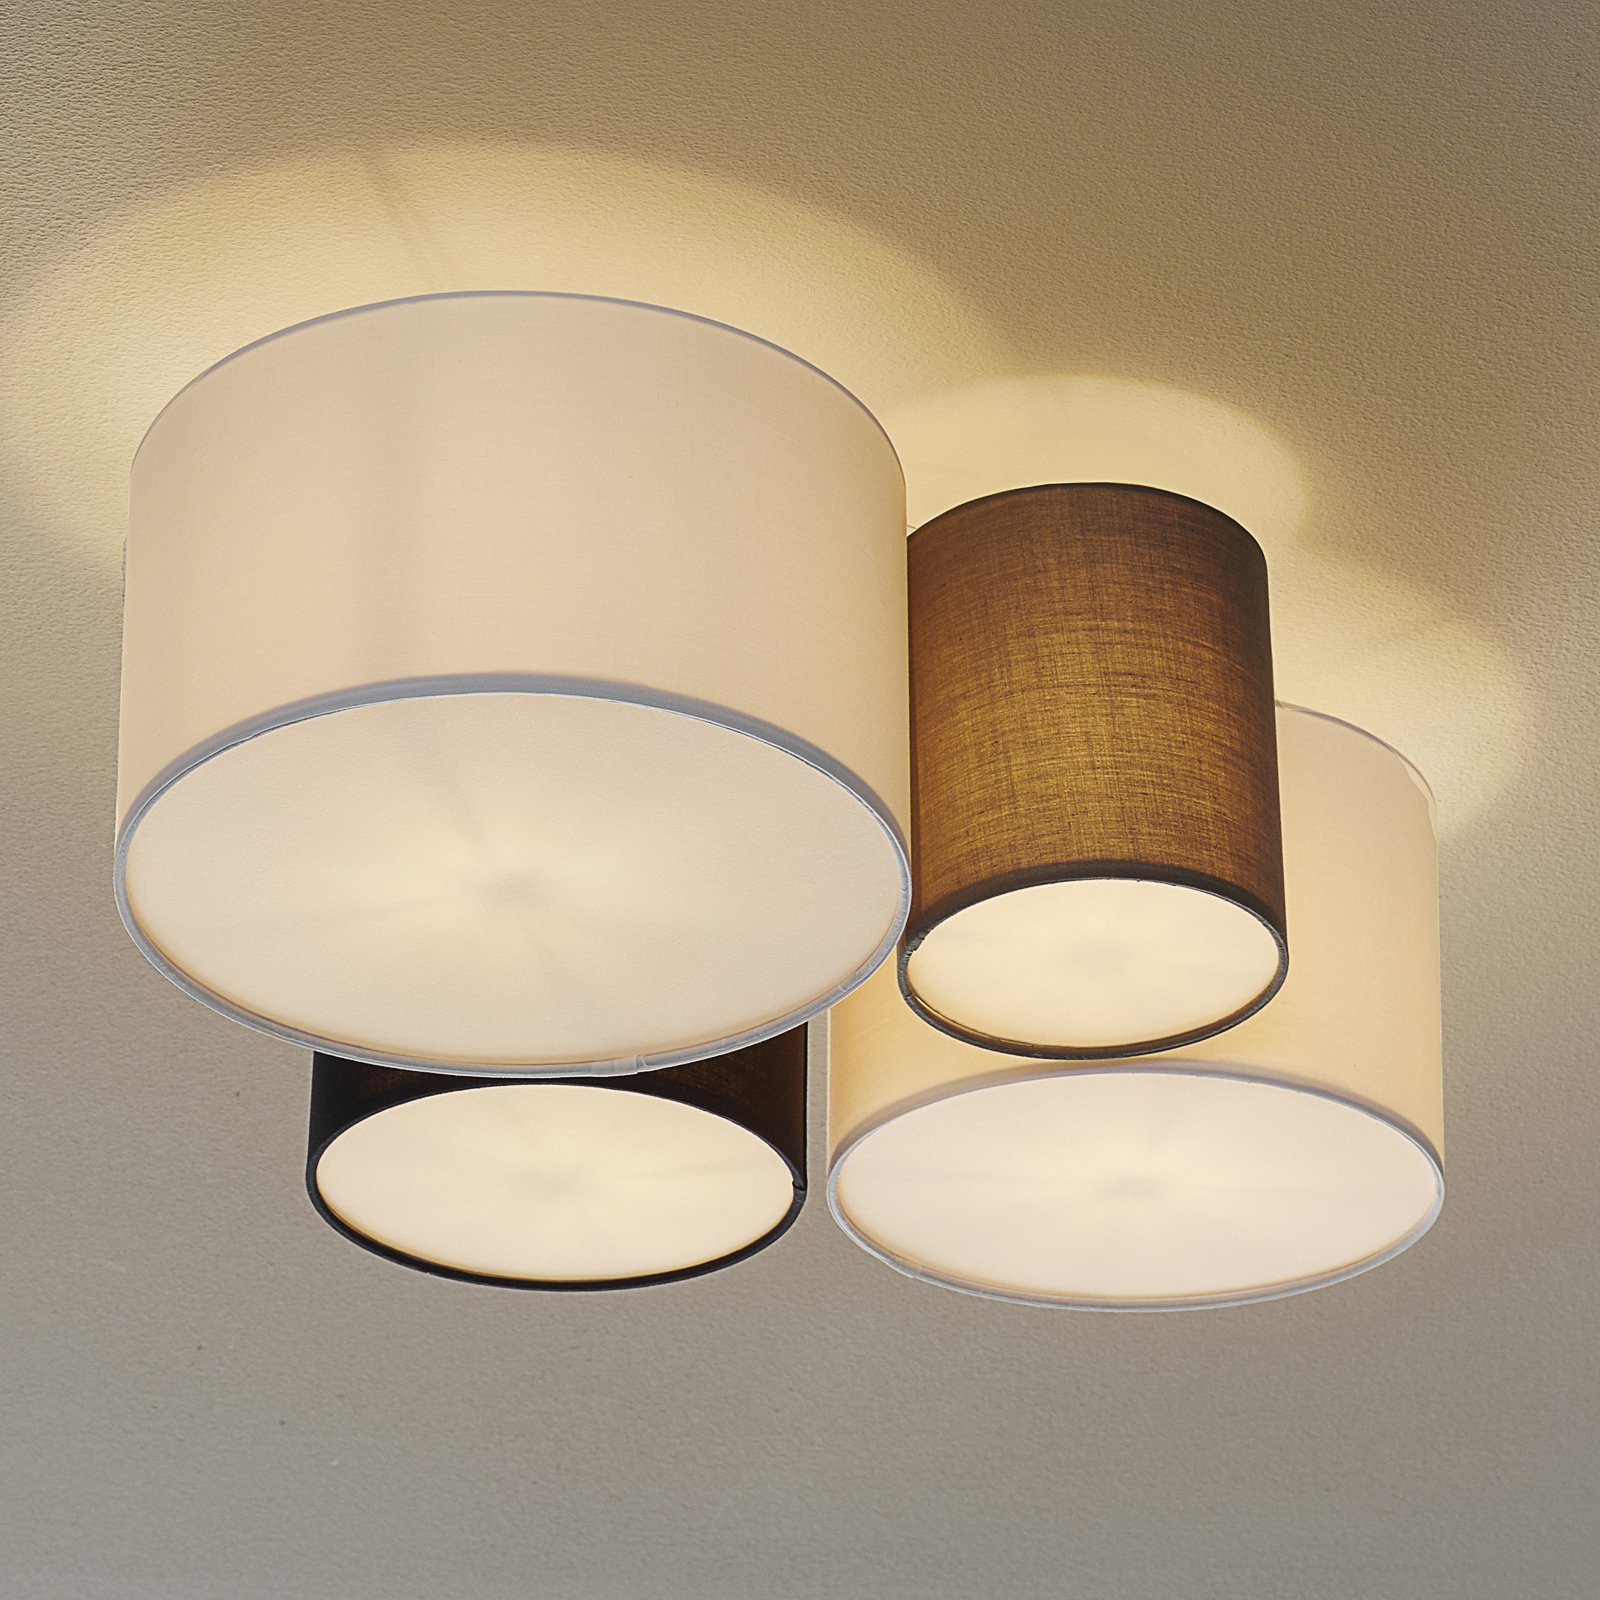 Hotel ceiling light with four fabric lampshades